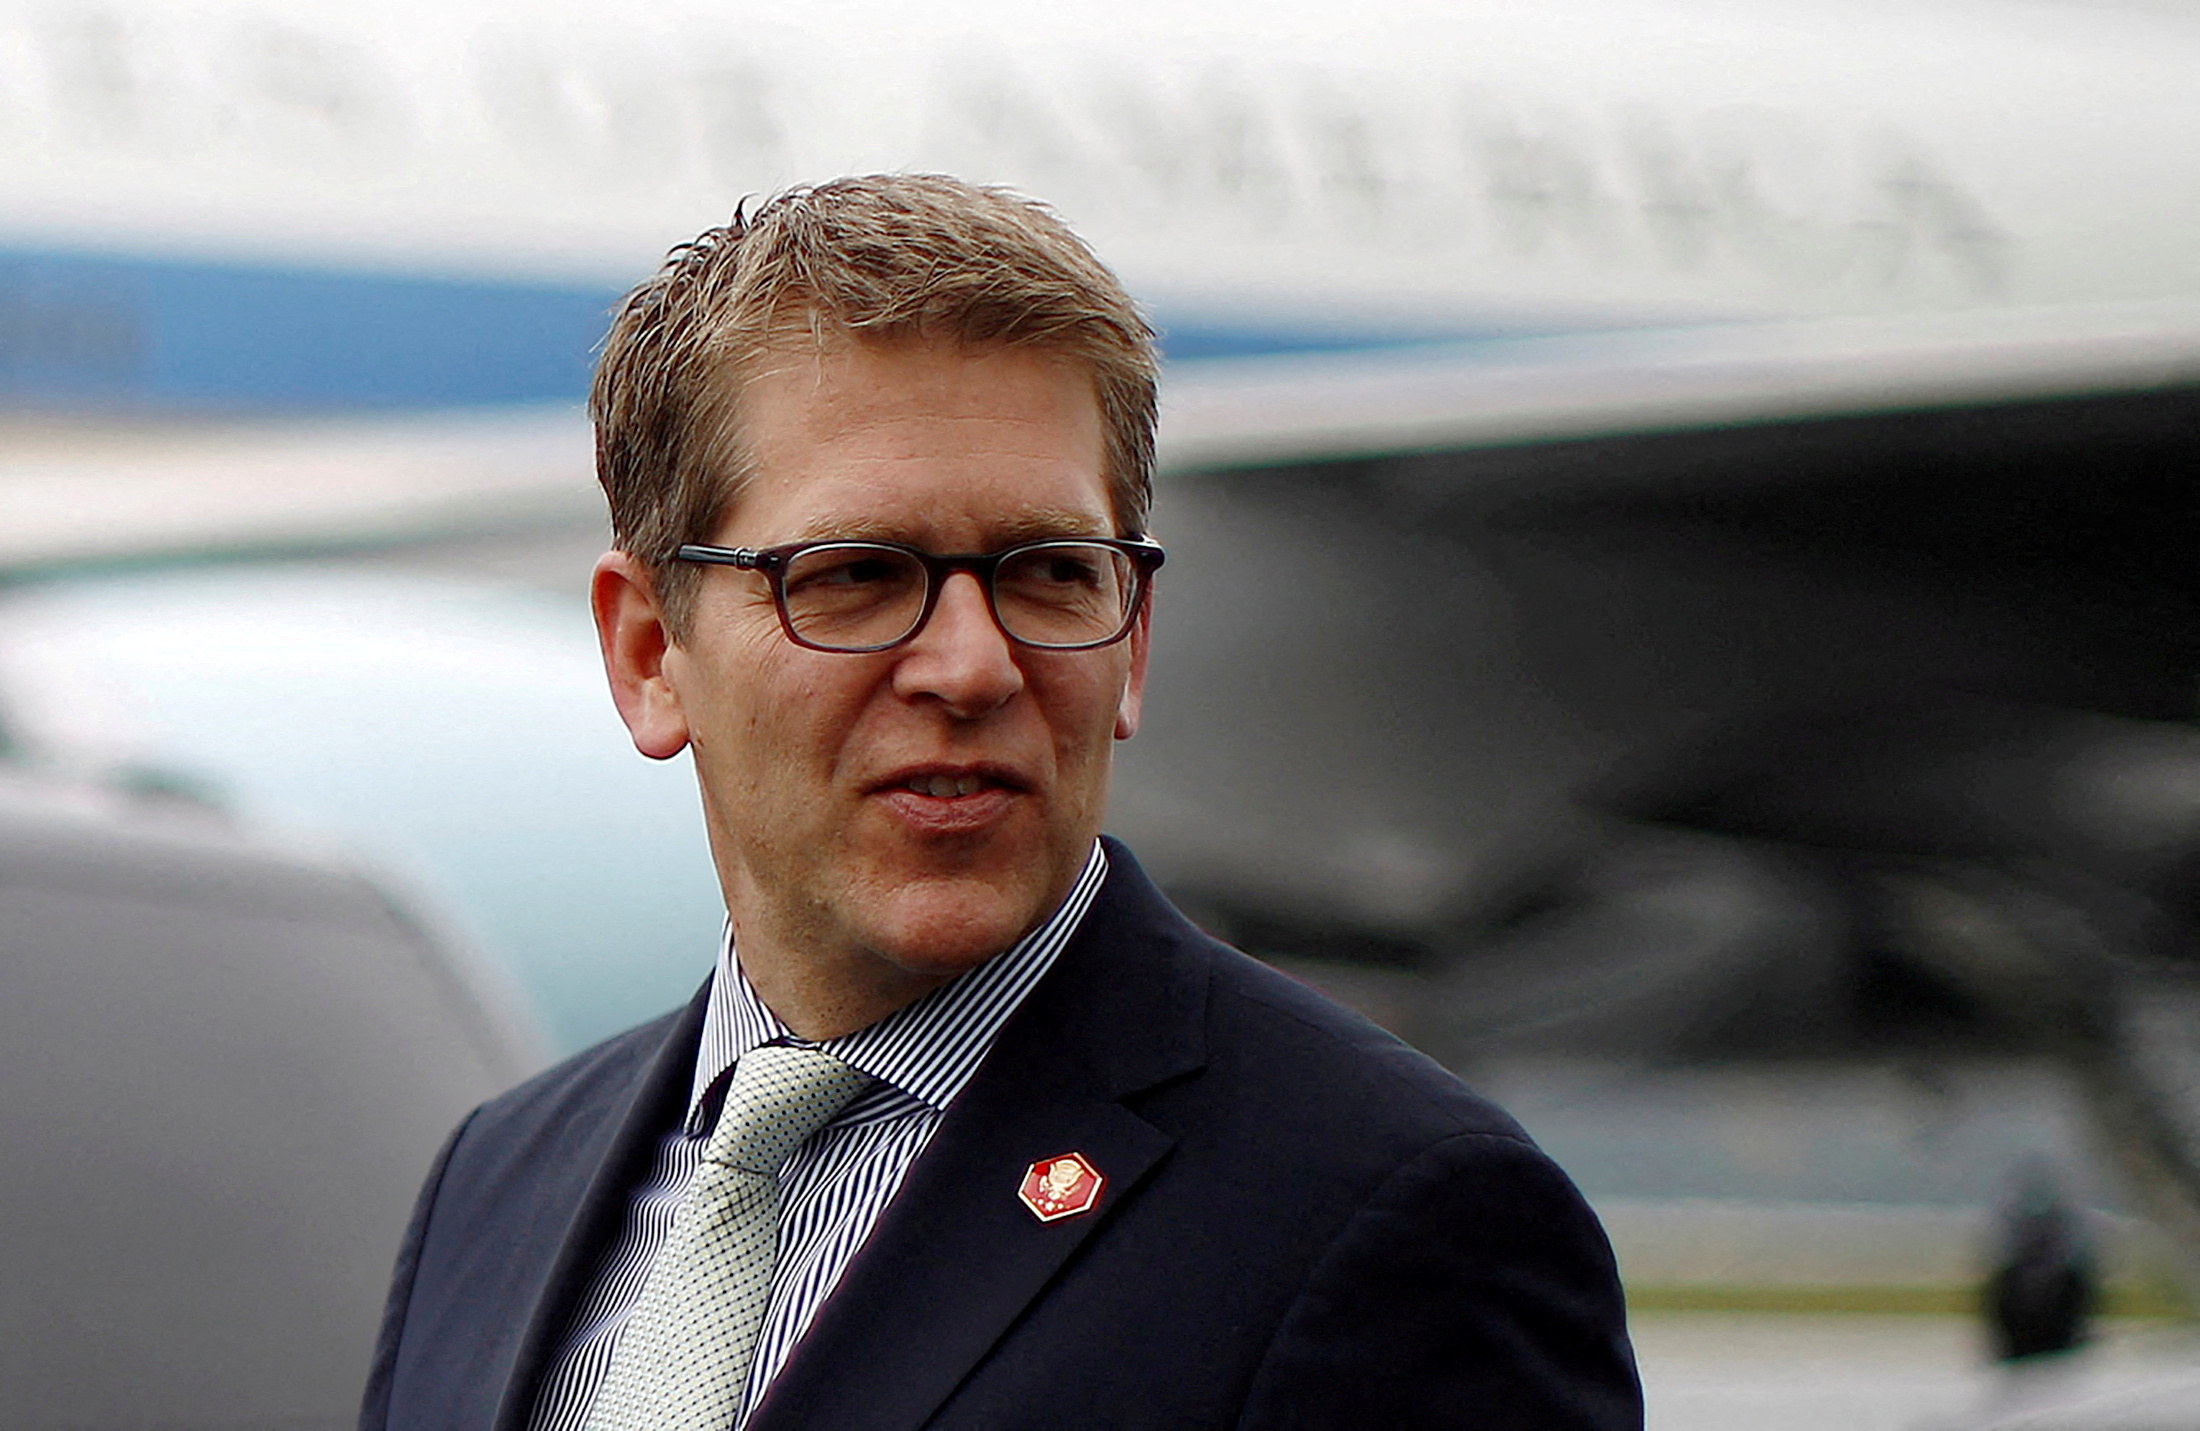 Then-White House Press Secretary Jay Carney is pictured upon his arrival in Swanton